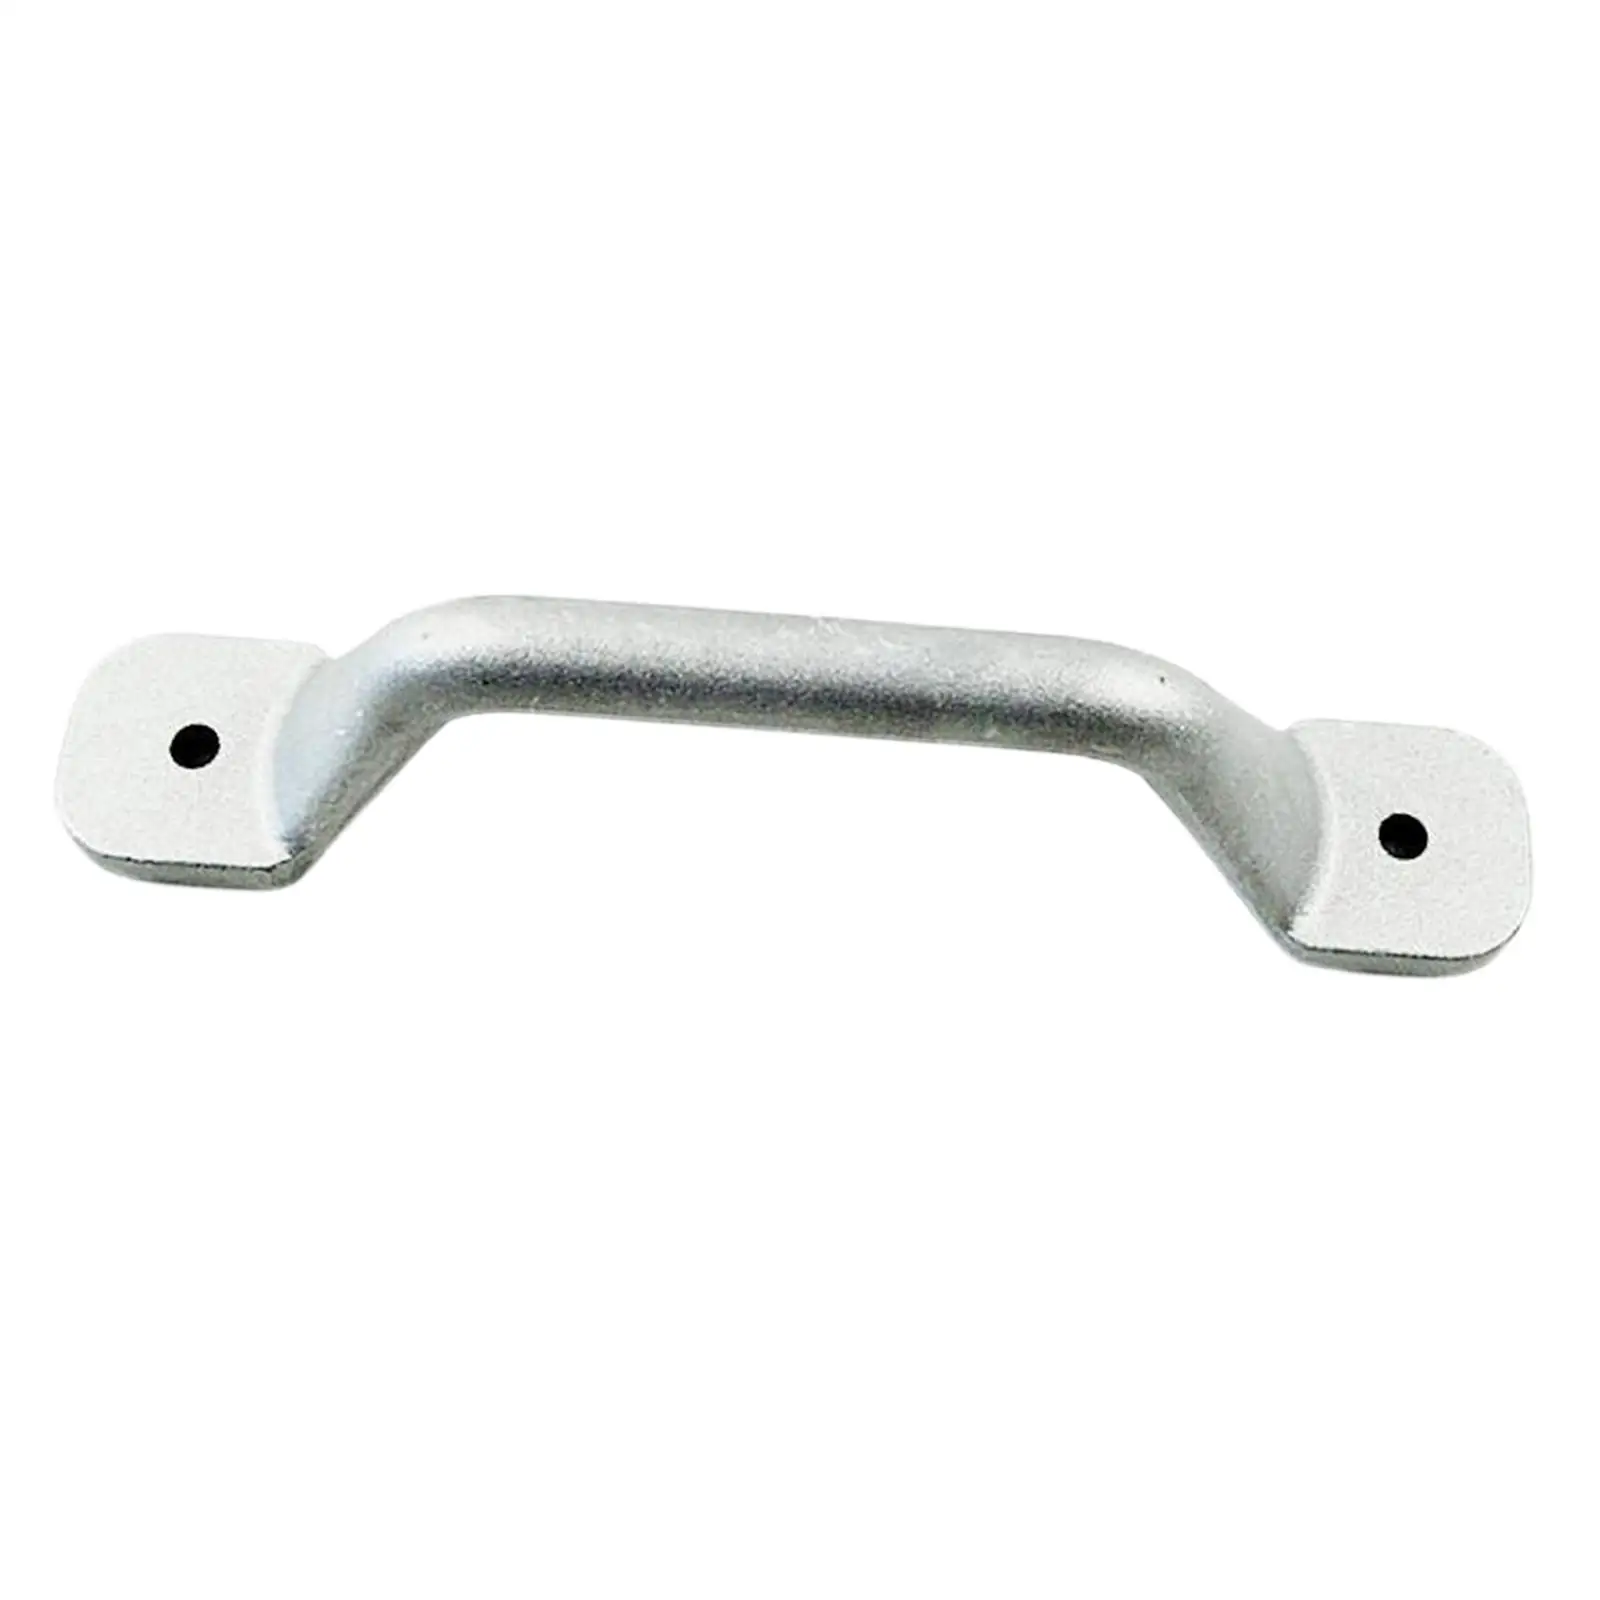 Aluminum Grab Entry  Bar Replaces for RV, Trailer, Camper Boat